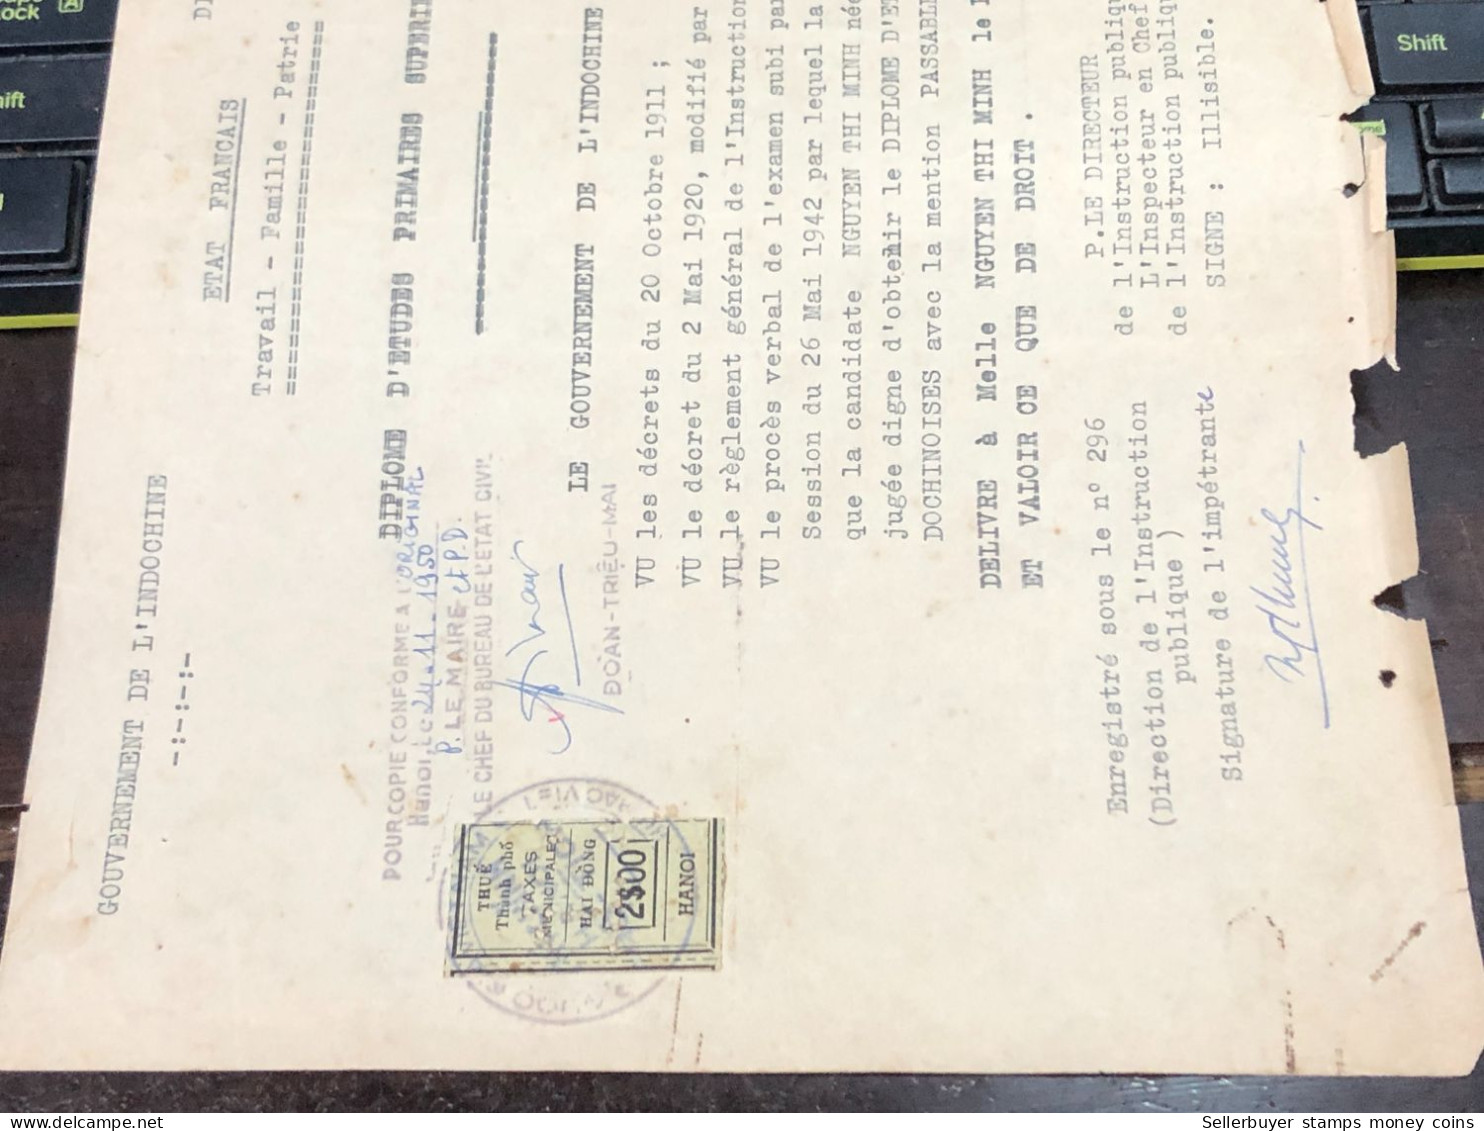 Viet Nam Suoth Old Documents That Have Children Authenticated(2$ Ha Noi 1950) PAPER Have Wedge QUALITY:GOOD 1-PCS Very R - Collezioni